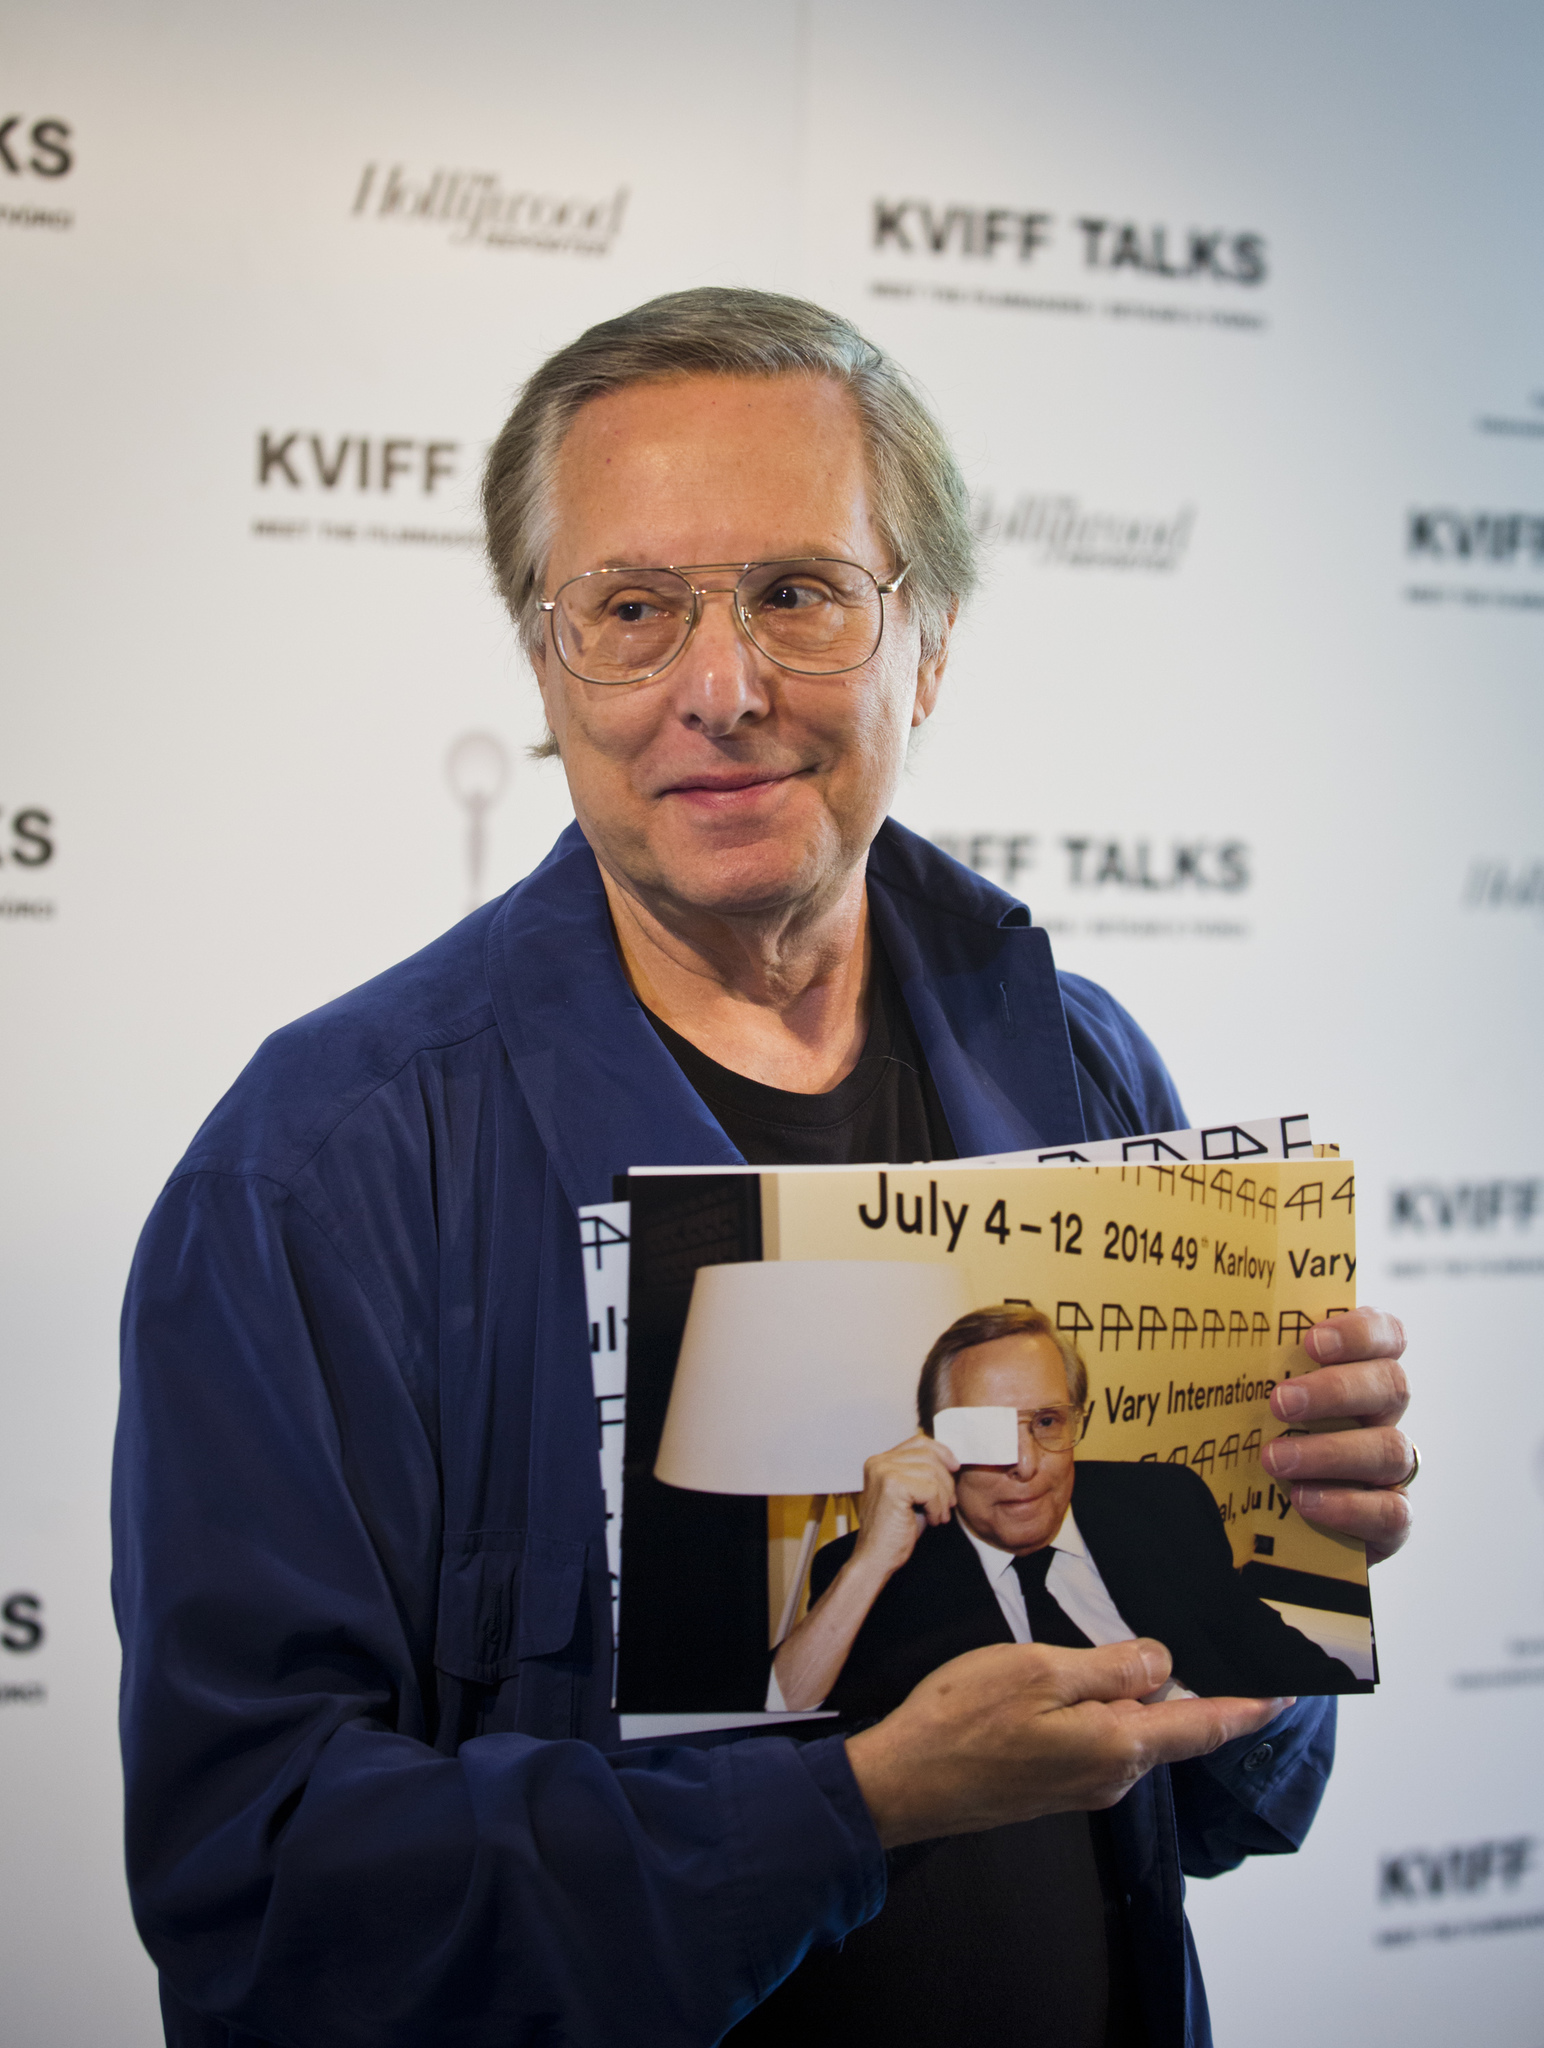 Director William Friedkin attends the KVIFF Talks discussion with filmmakers at the 49th Karlovy Vary International Film Festival (KVIFF) on July 11, 2014 in Karlovy Vary, Czech Republic.